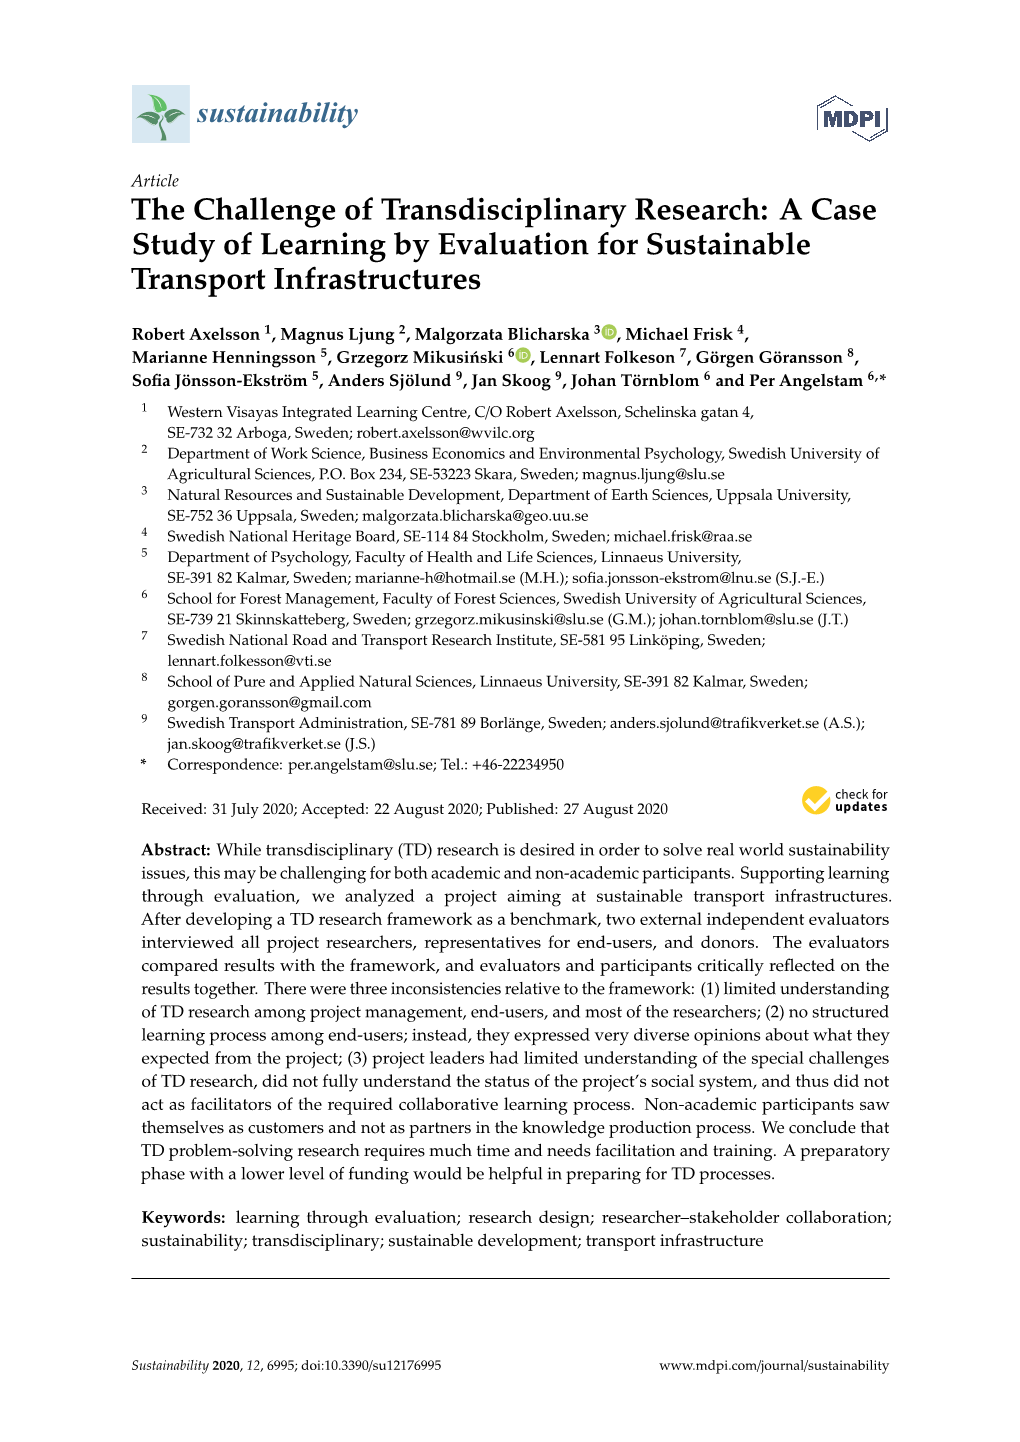 A Case Study of Learning by Evaluation for Sustainable Transport Infrastructures